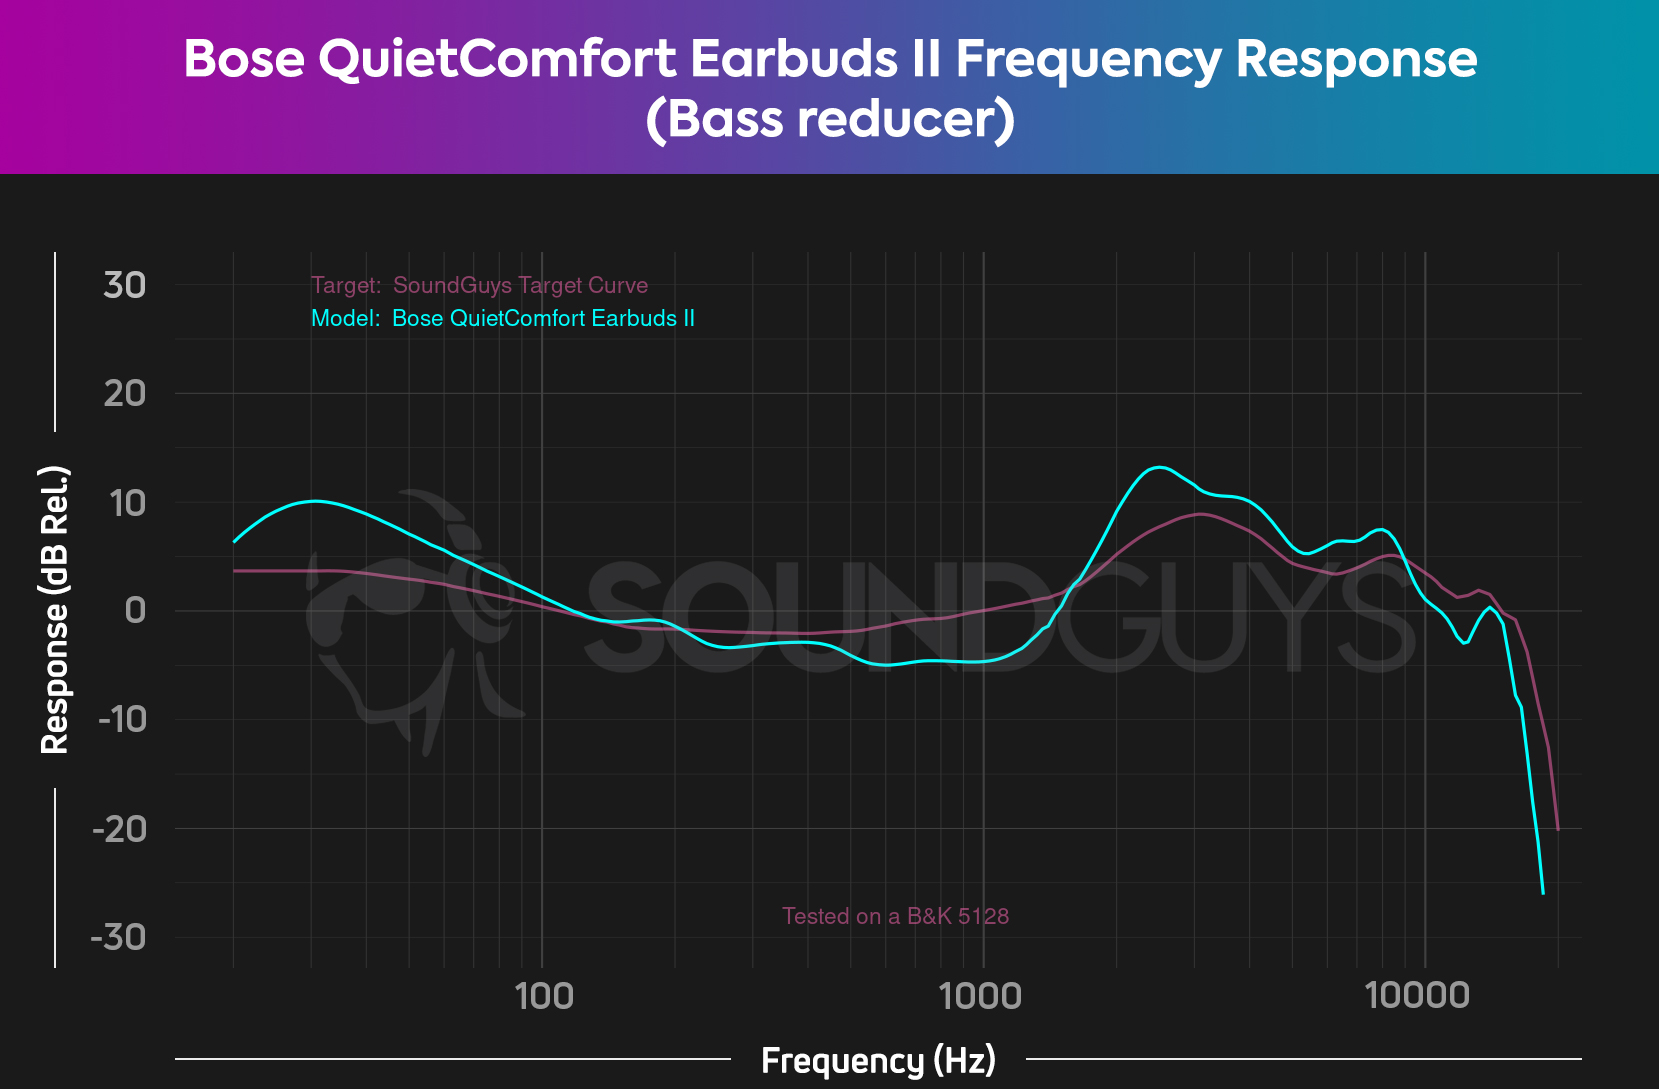 The most accurate preset, we find the Bass reducer EQ to be the preferred setting for the Bose QuietComfort Earbuds II.